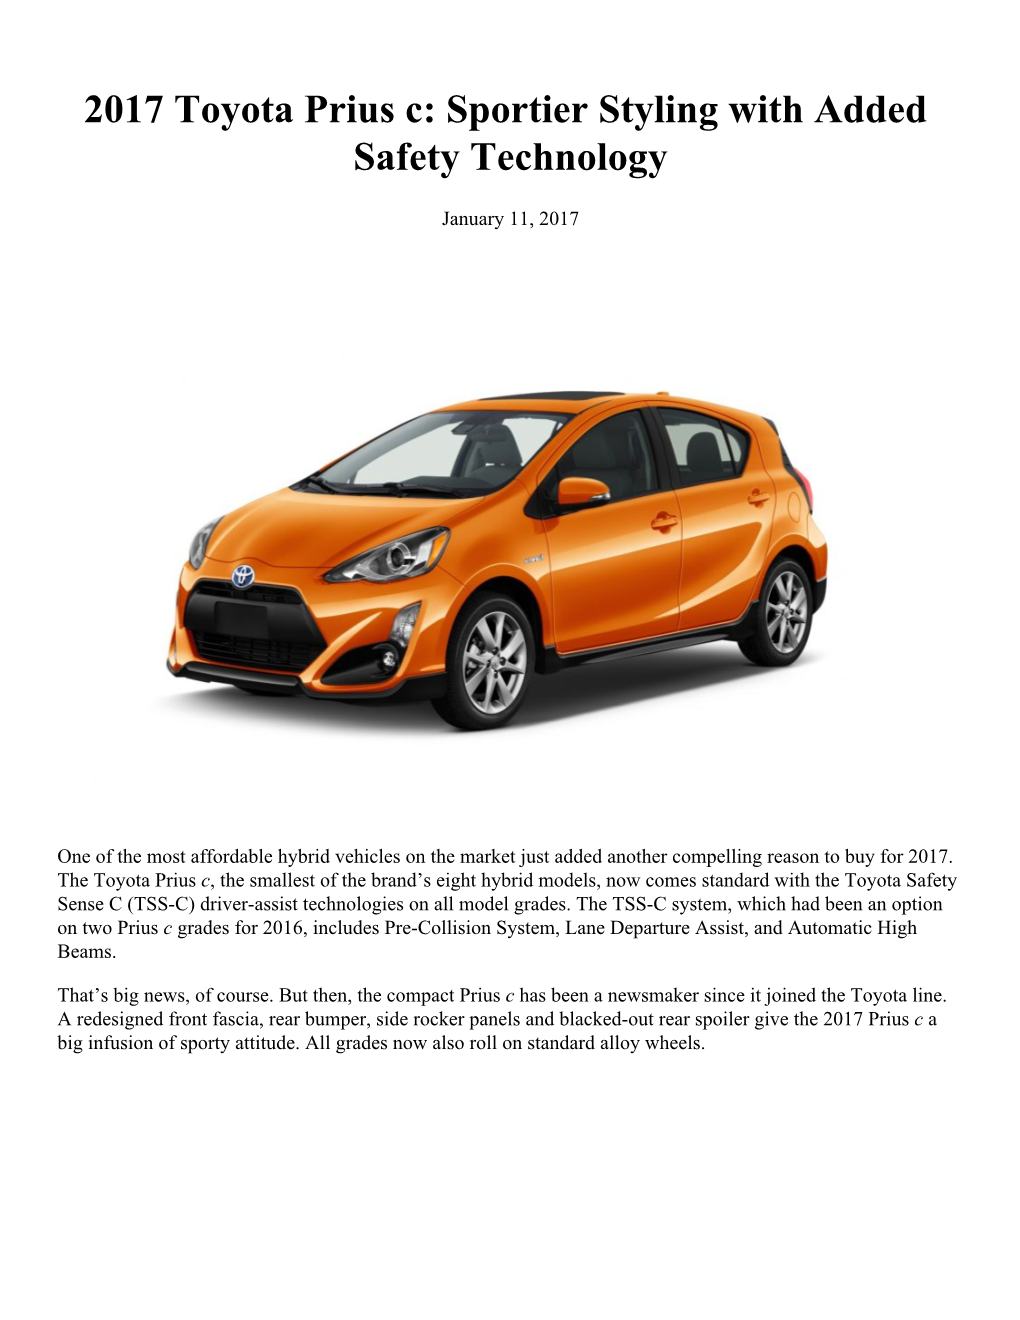 2017 Toyota Prius C: Sportier Styling with Added Safety Technology